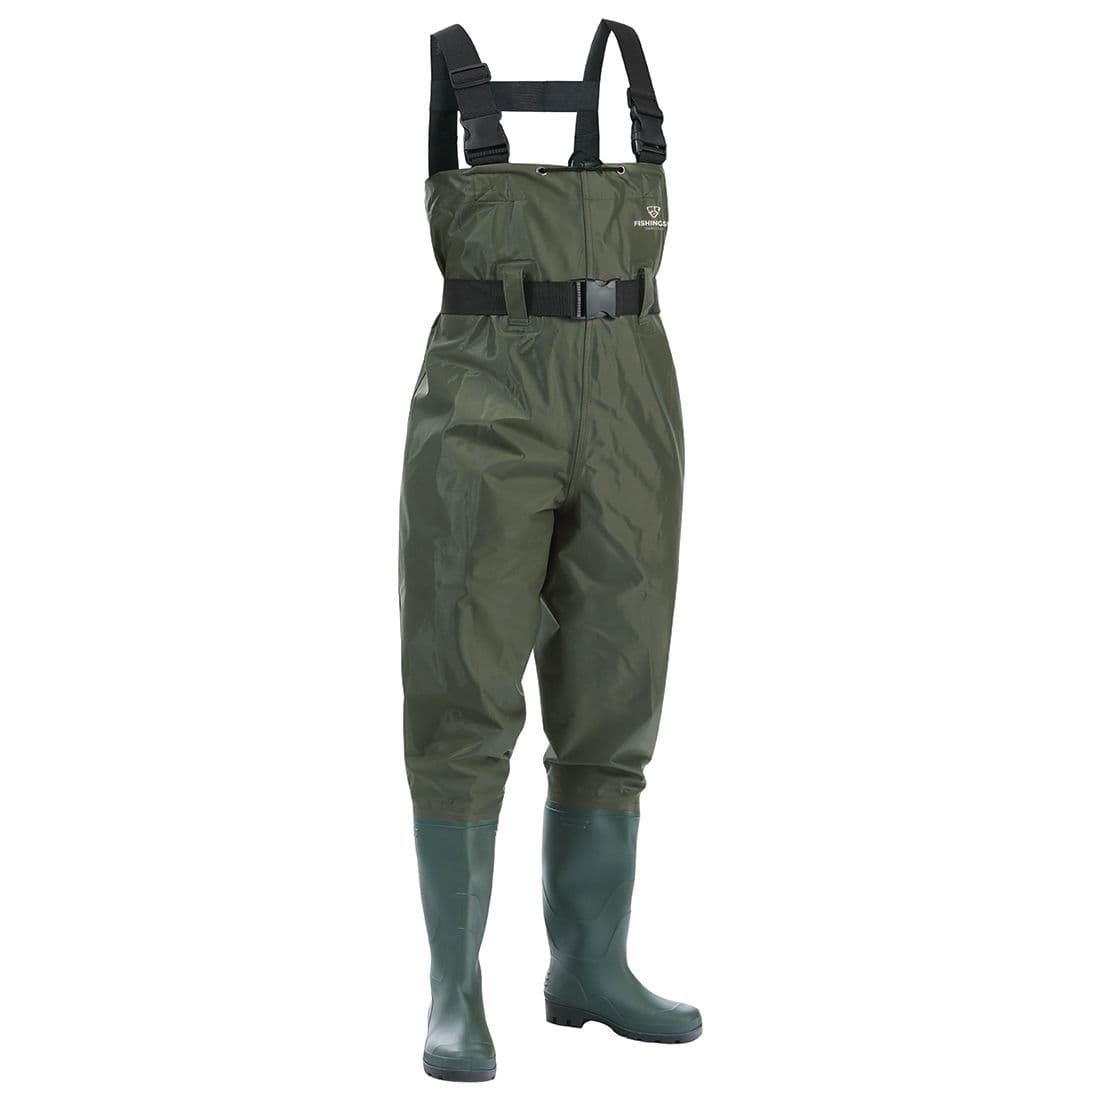 Buy Standard Quality China Wholesale Kids Neoprene Chest Waders With Rubber  Boots 100% Waterproof Breathable Insulated Camo Fishing Waders For Toddler Children  Boys $6 Direct from Factory at Yangzhou Eupheng Hook Manufactory